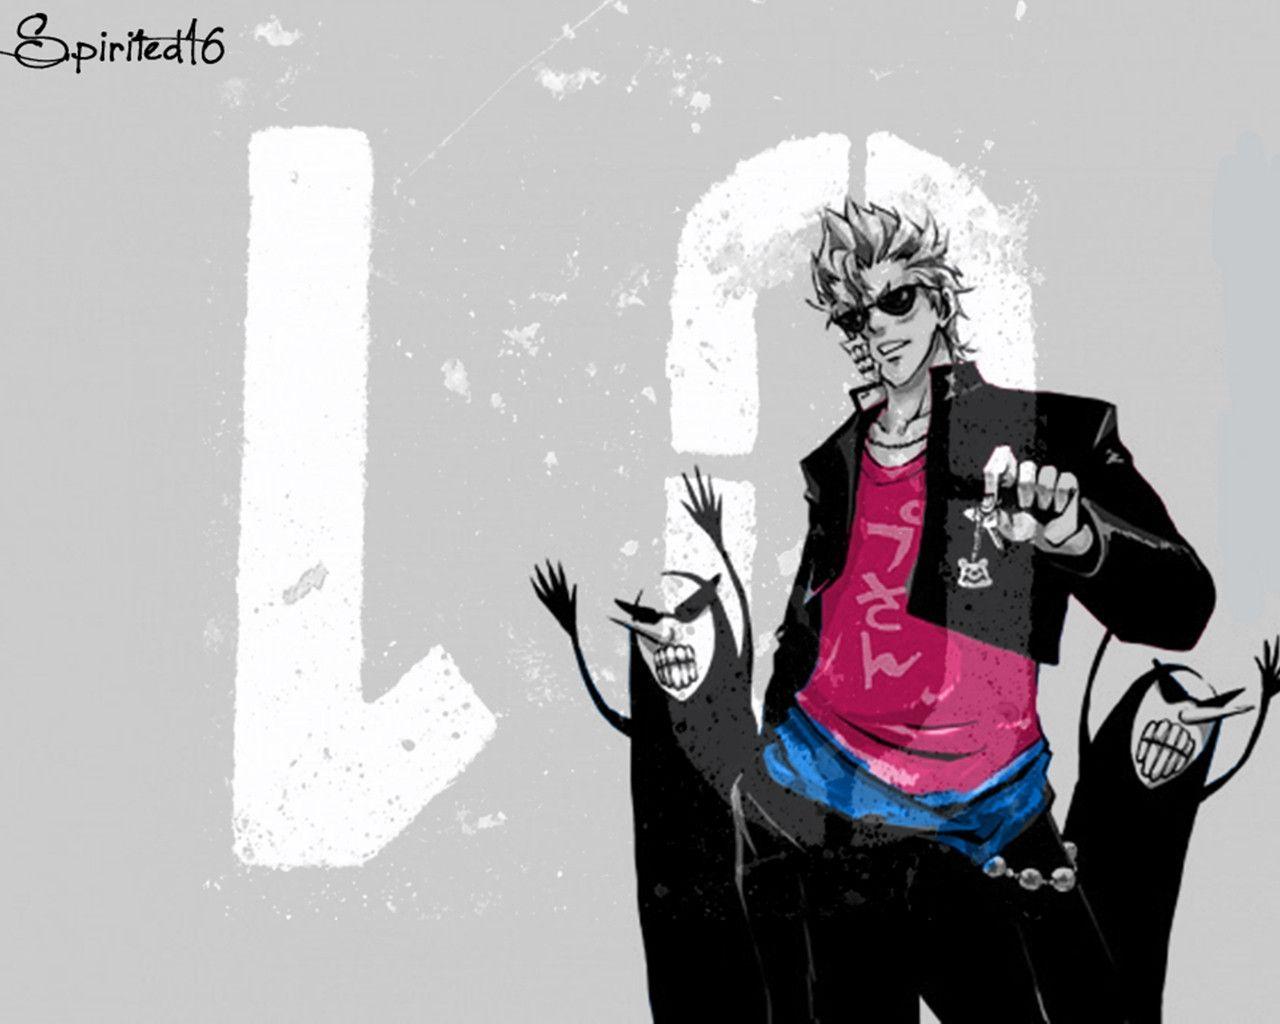 Grimmjow ♥ Jeagerjaques Wallpaper